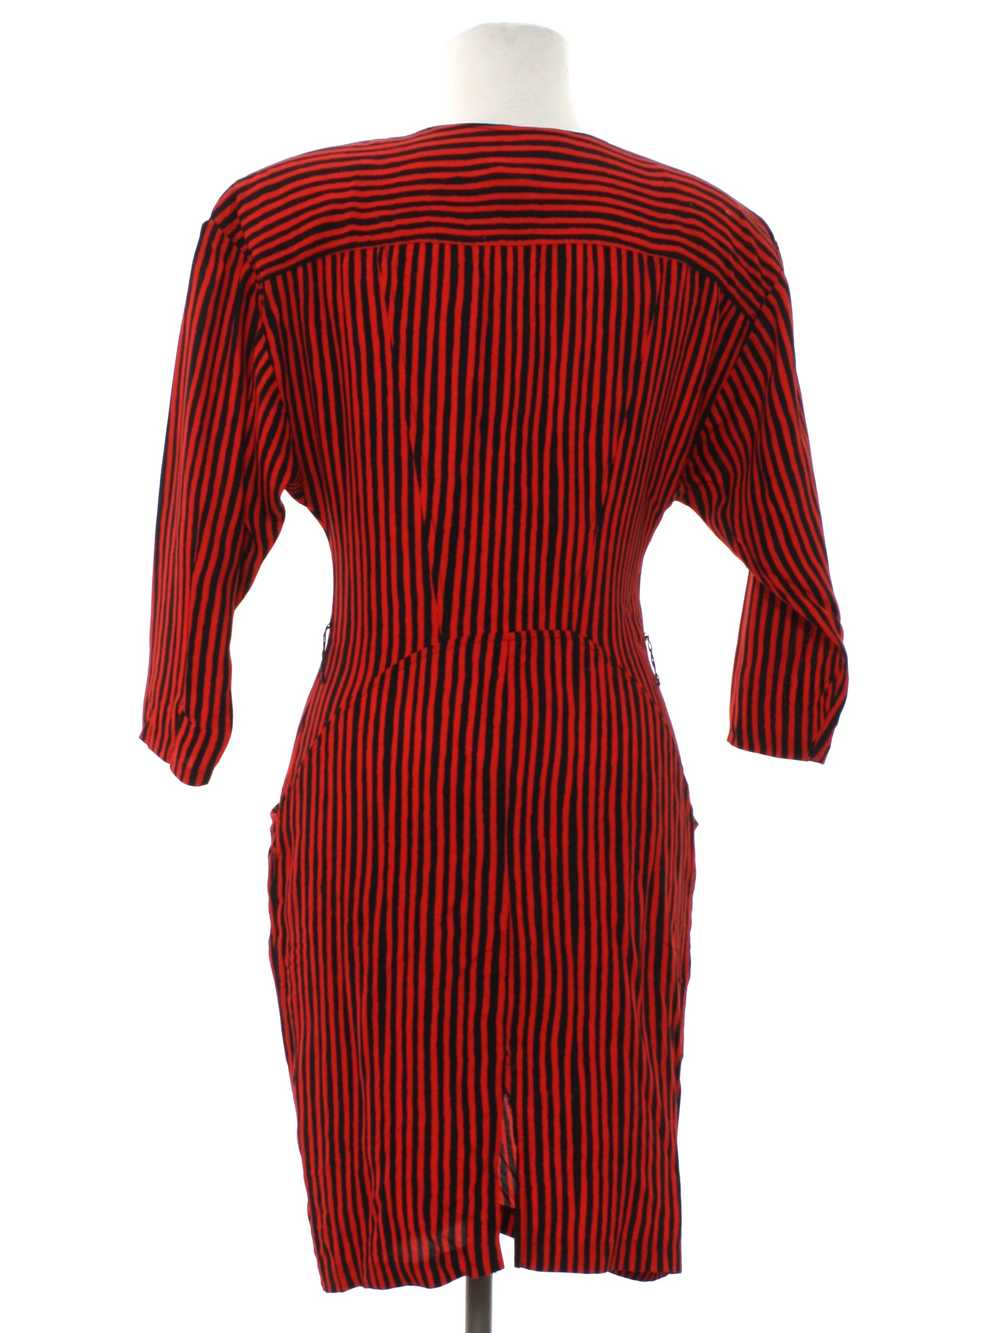 1980's Contempo Casuals Totally 80s Dress - image 3